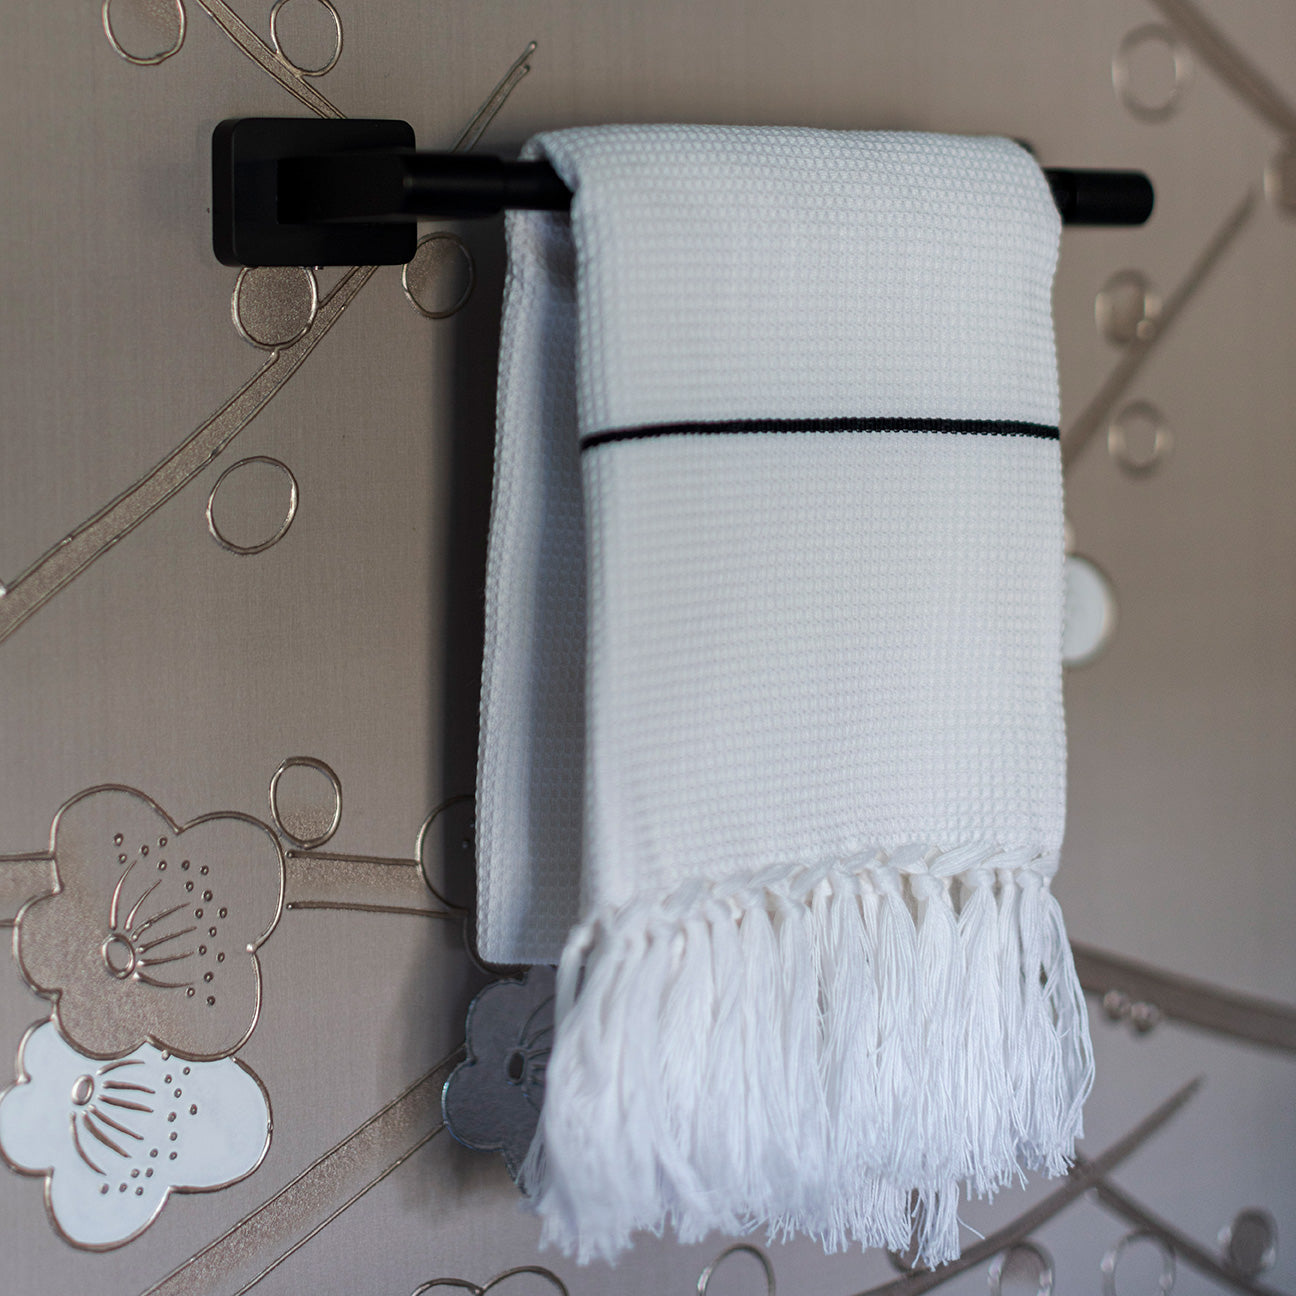 M+A NYC Honeycomb Towel Hanging on a towel rack in the Kingston  Design Showhouse 